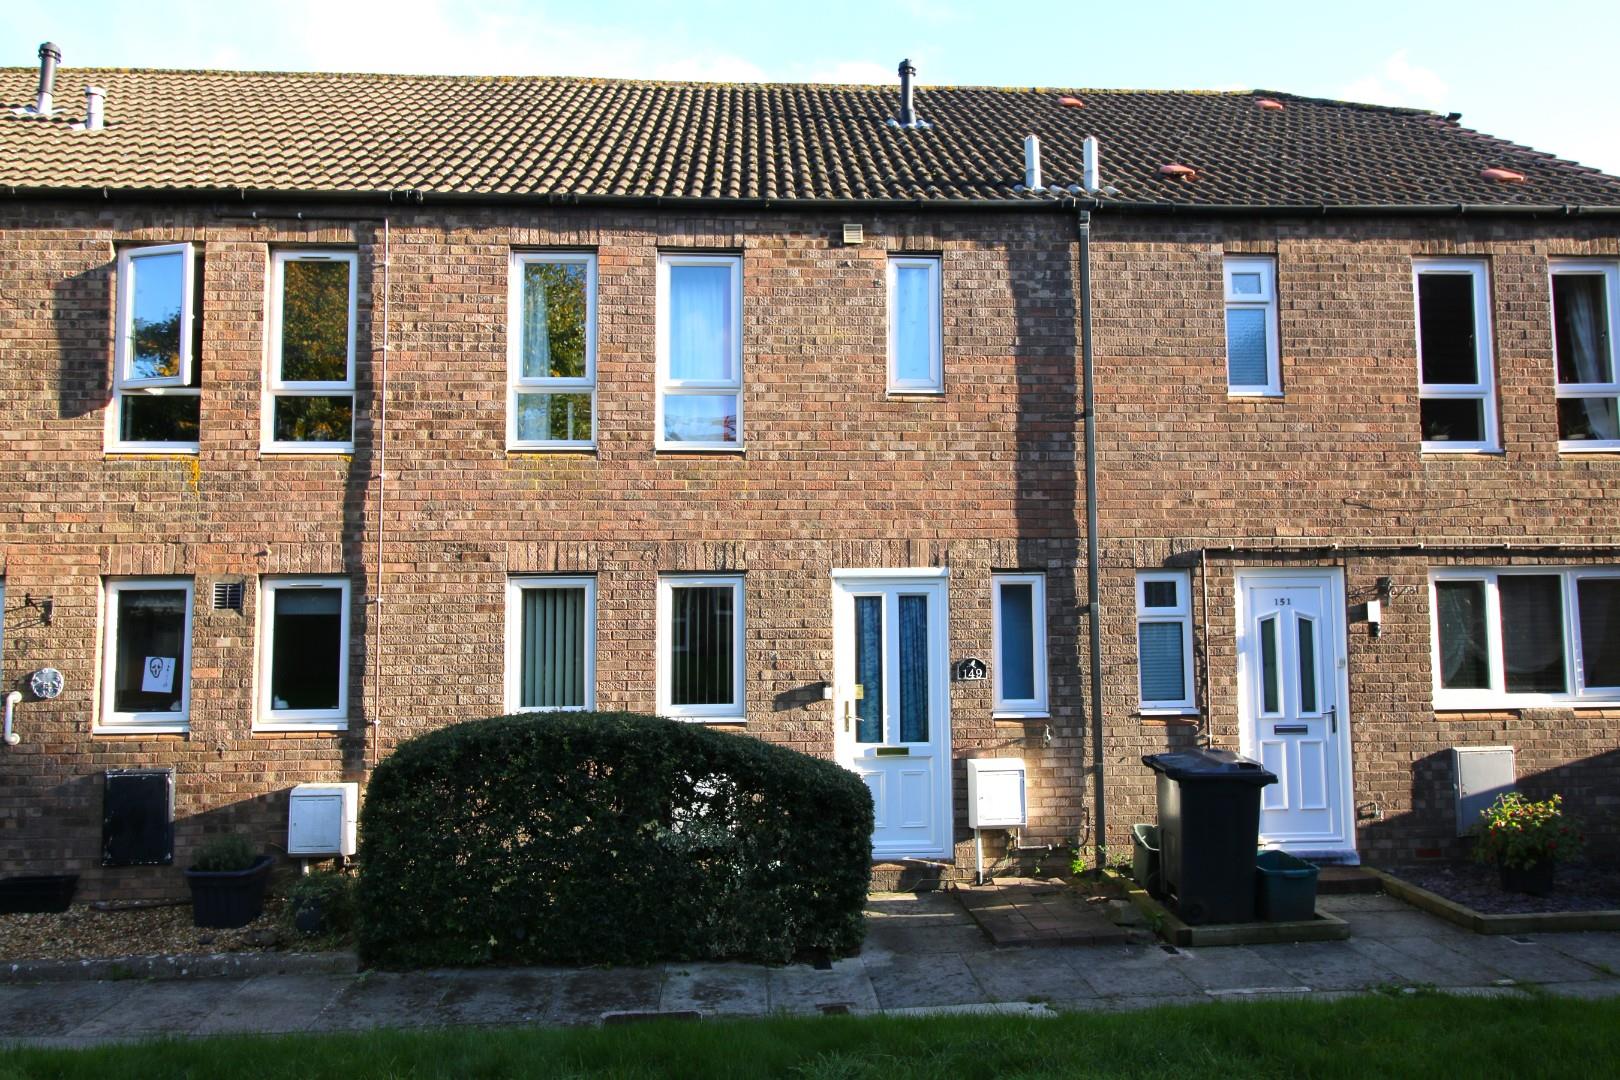 Ideally situated in central Yatton